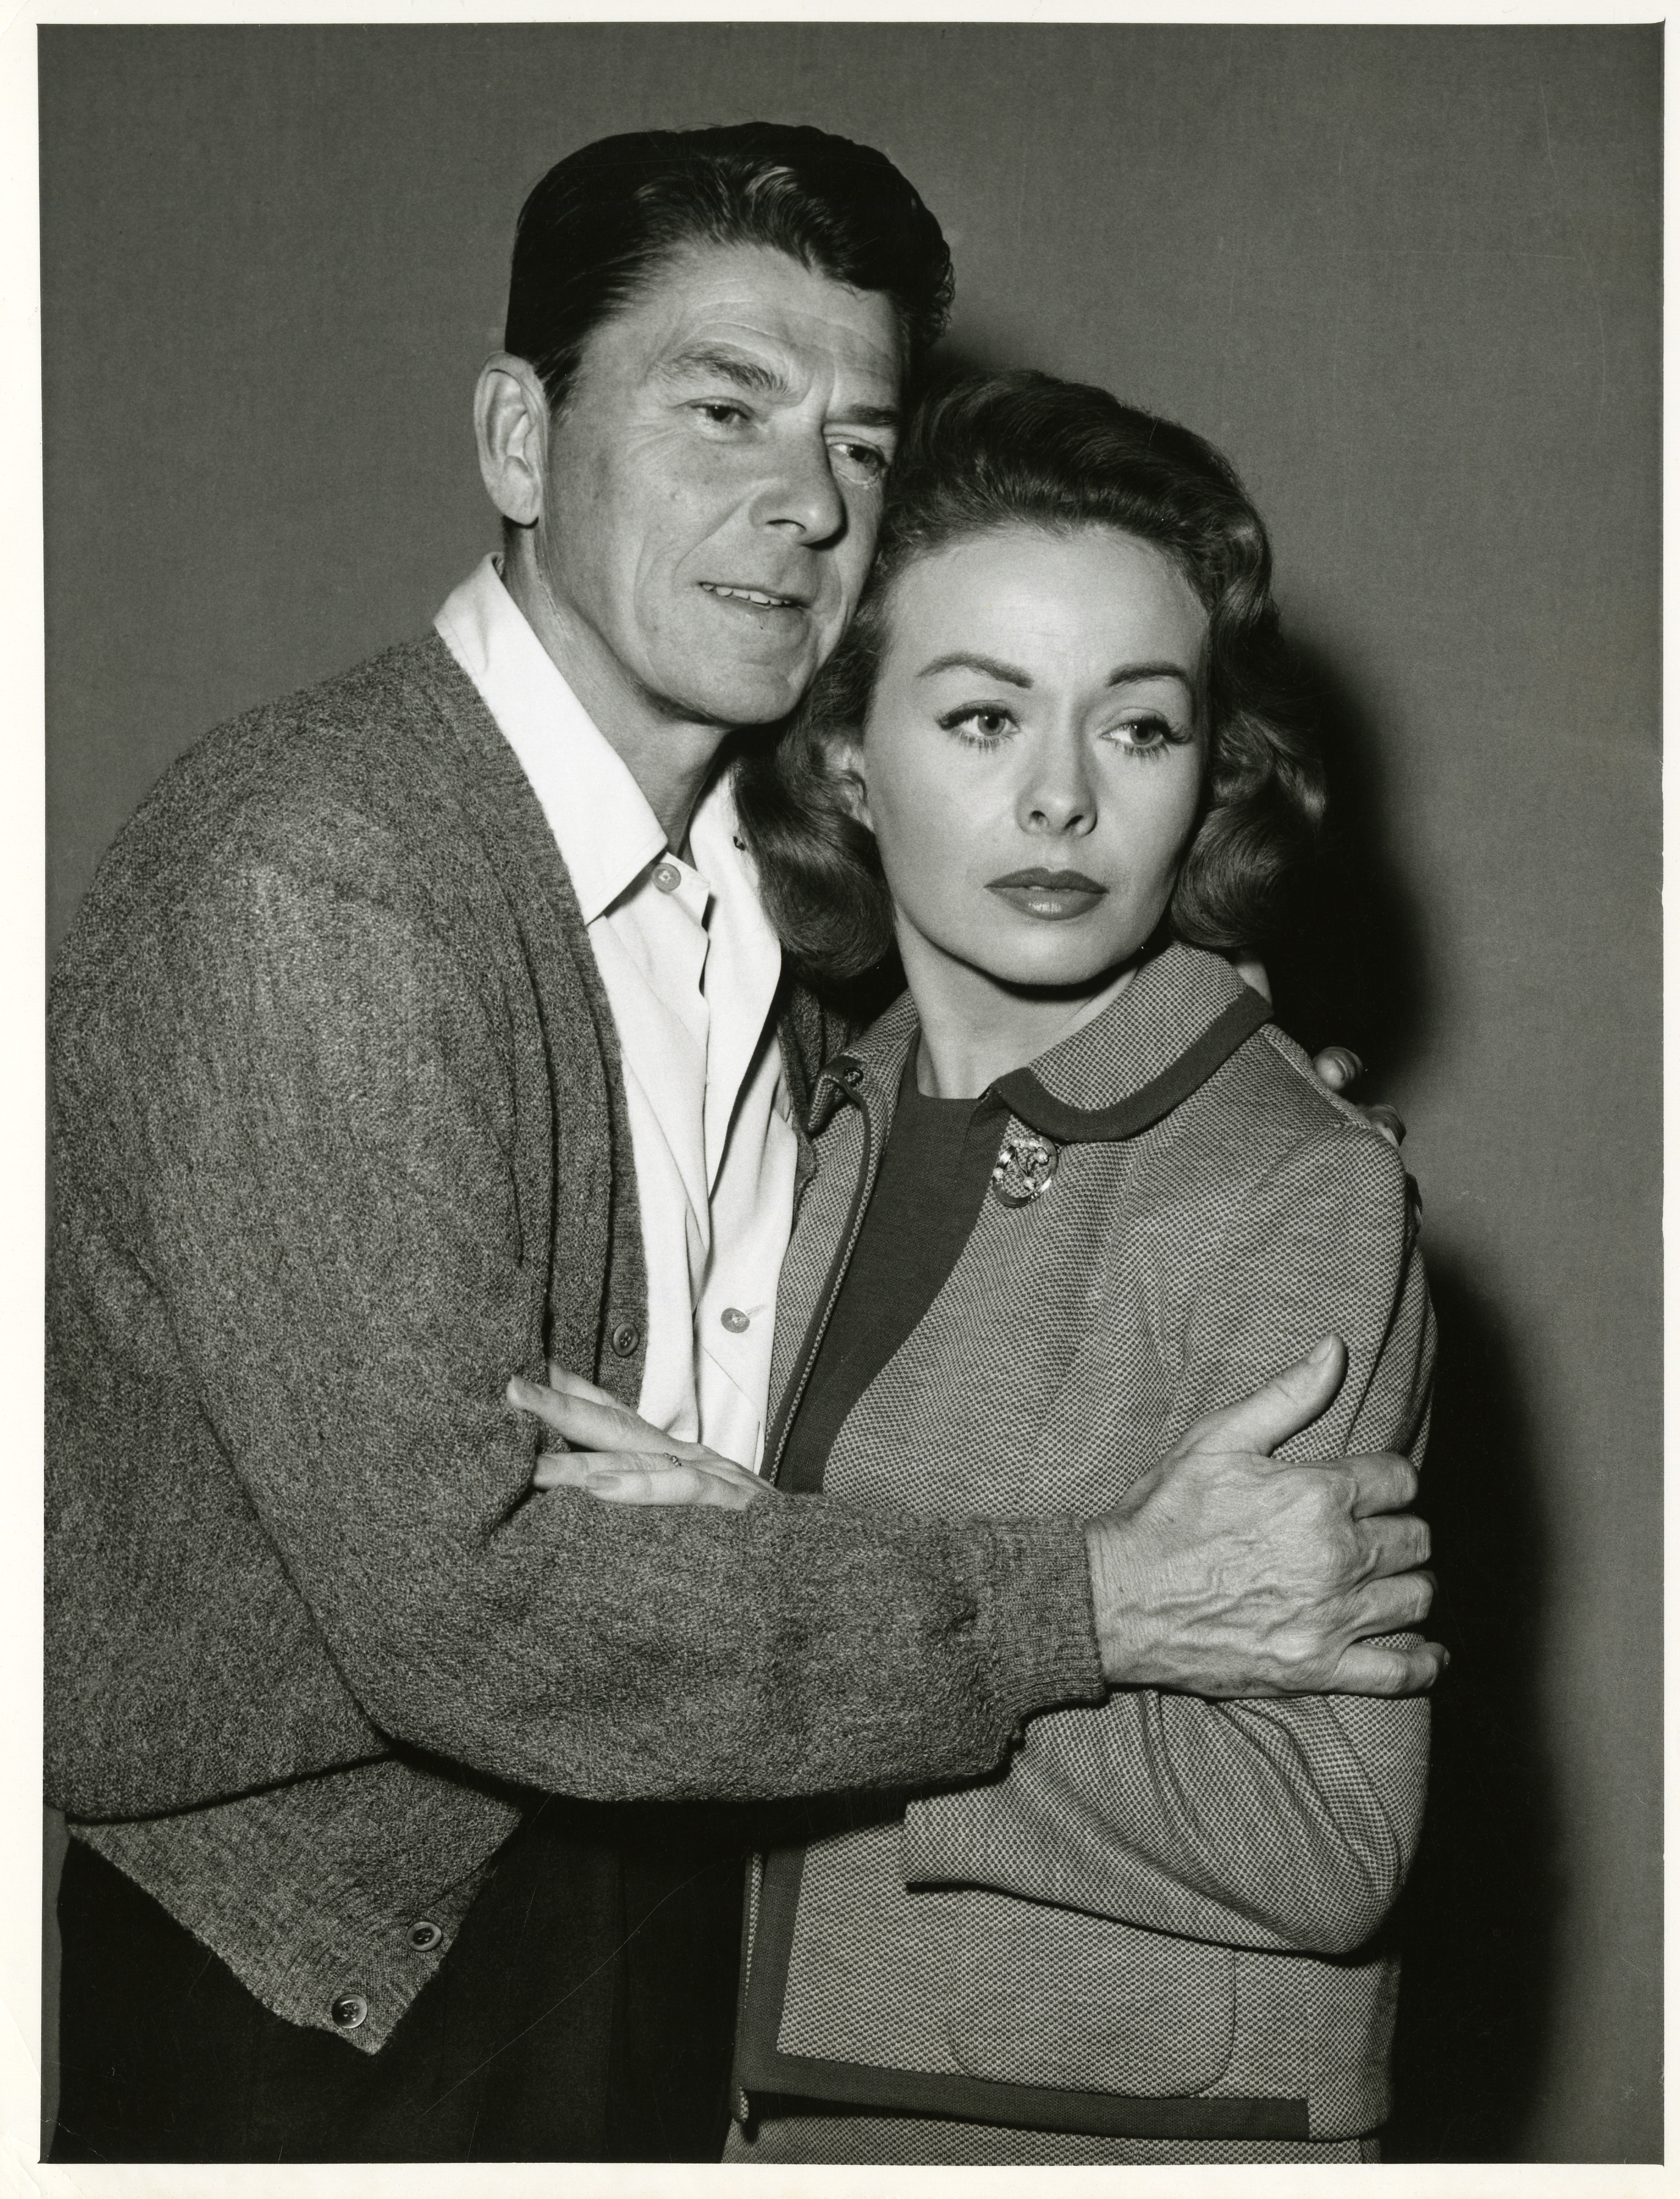 Ronald Reagan and Jeanne Crain from (General Electric) GE Theater “Journal of Hope”